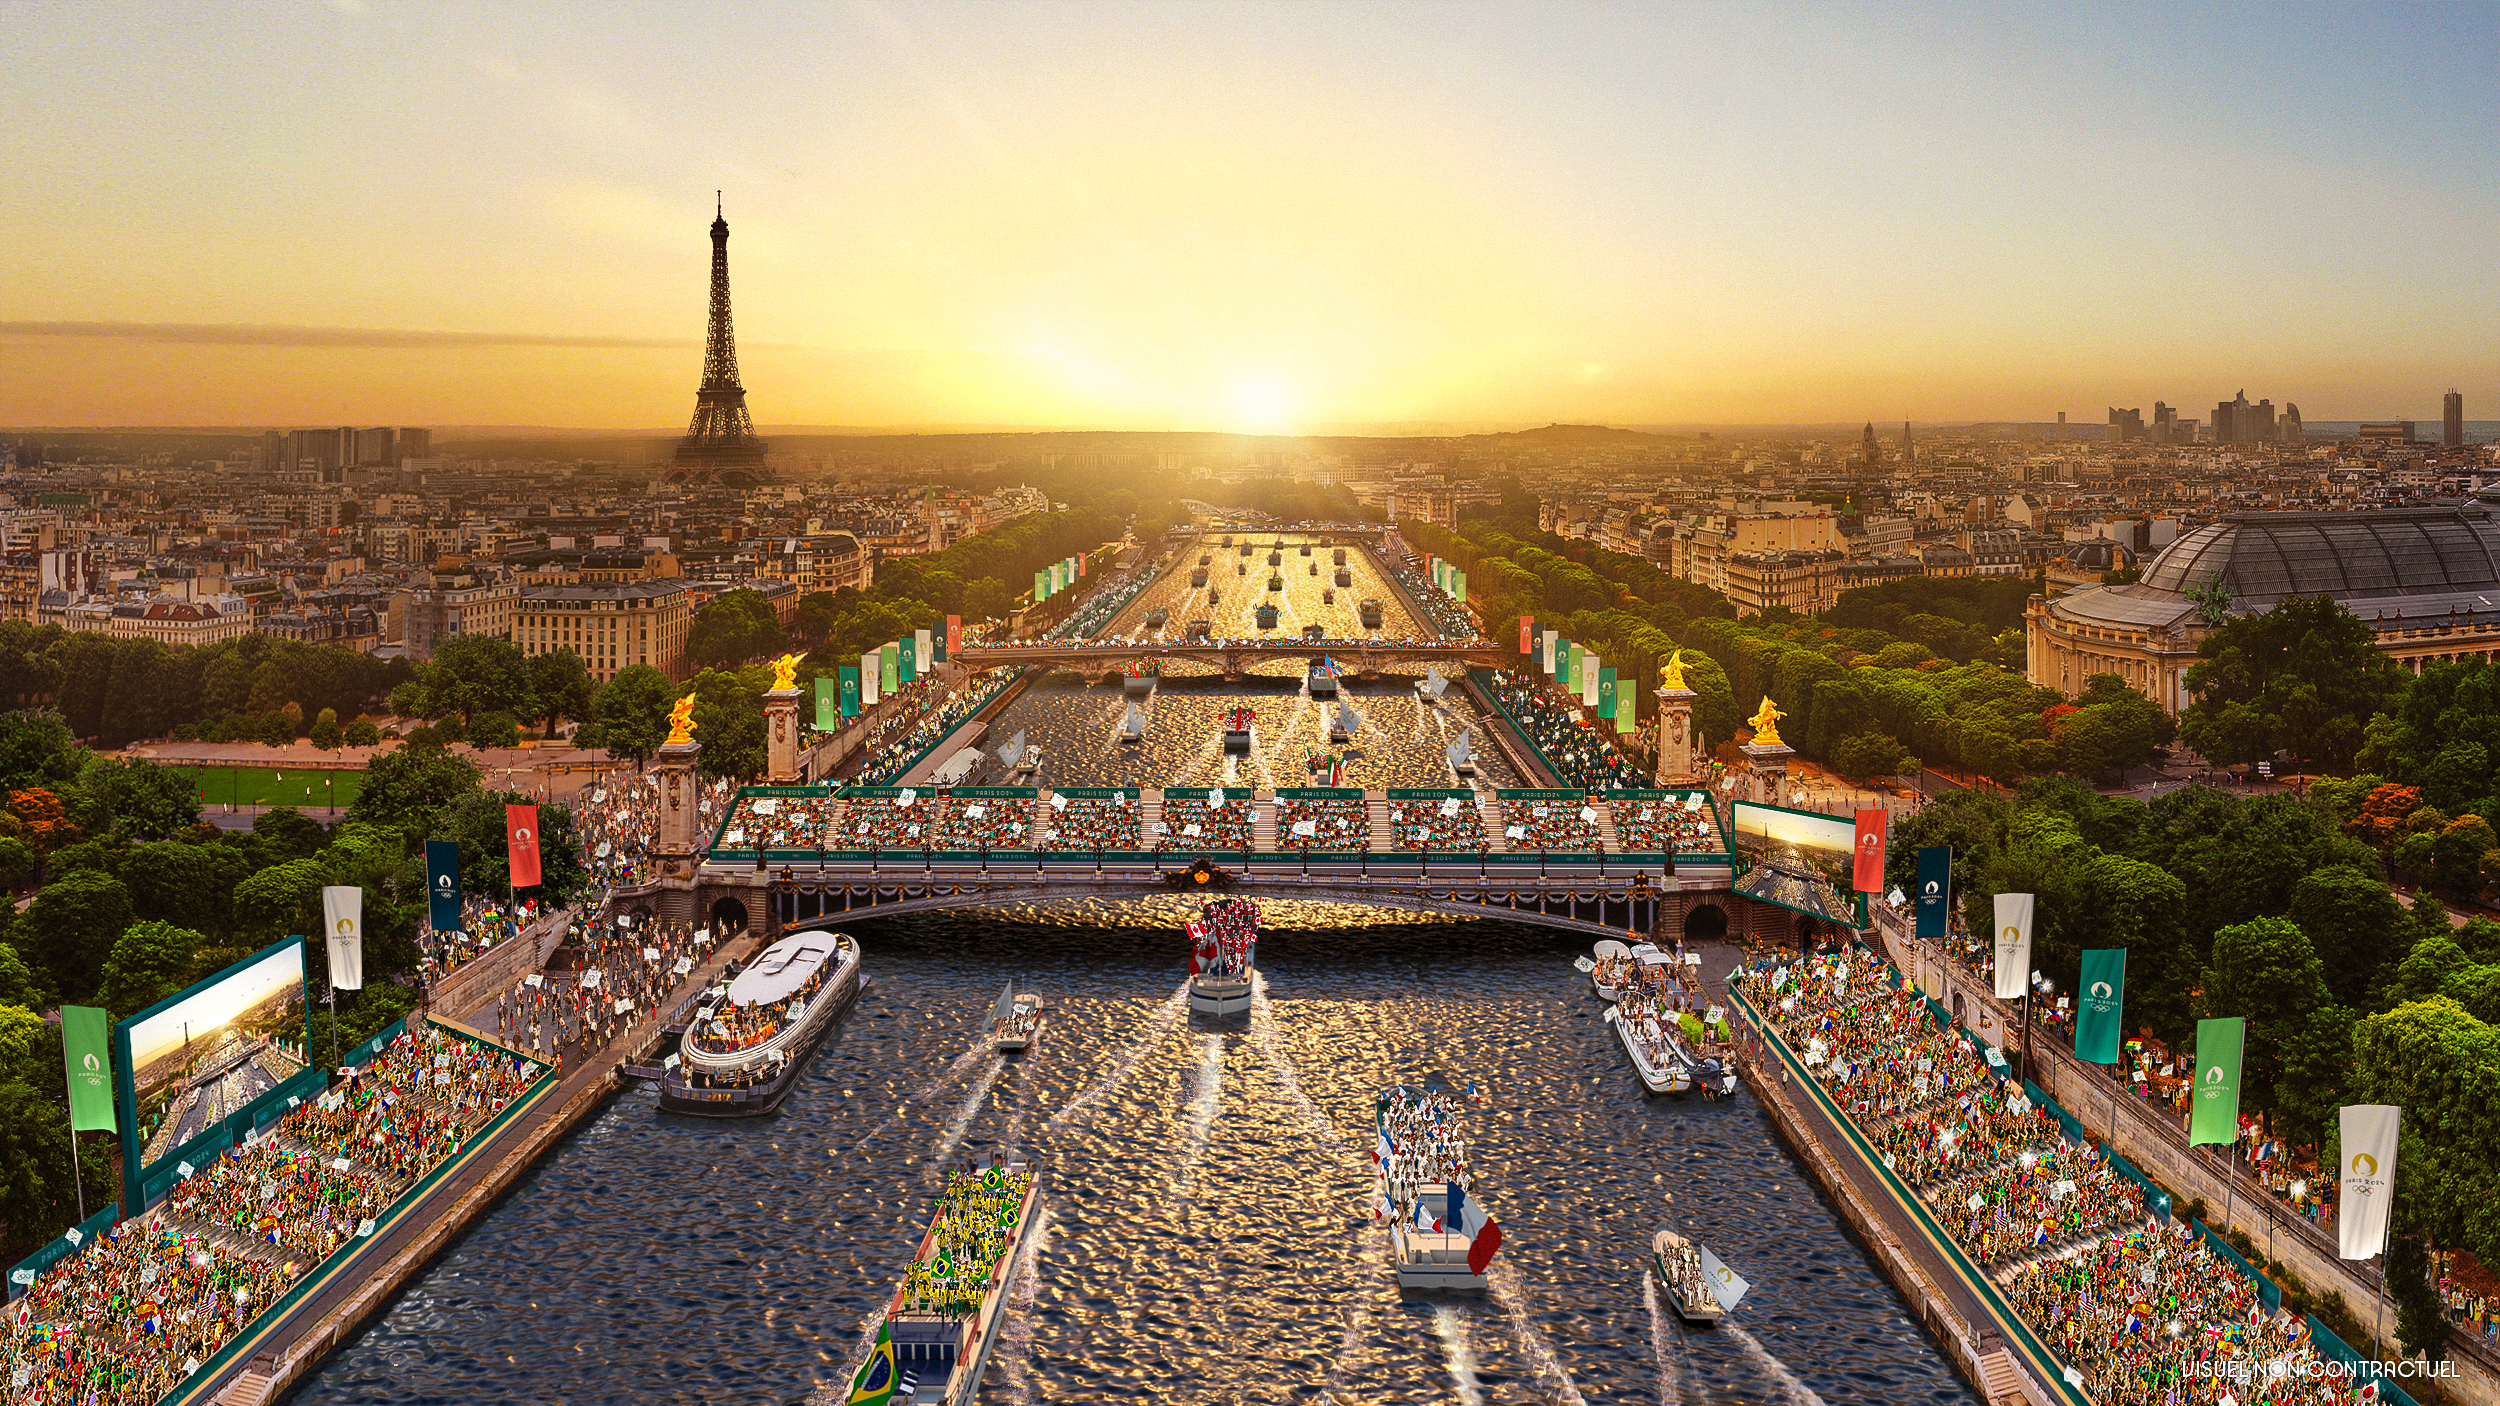 2024 Paris Olympics Opening Ceremony is Coming to IMAX